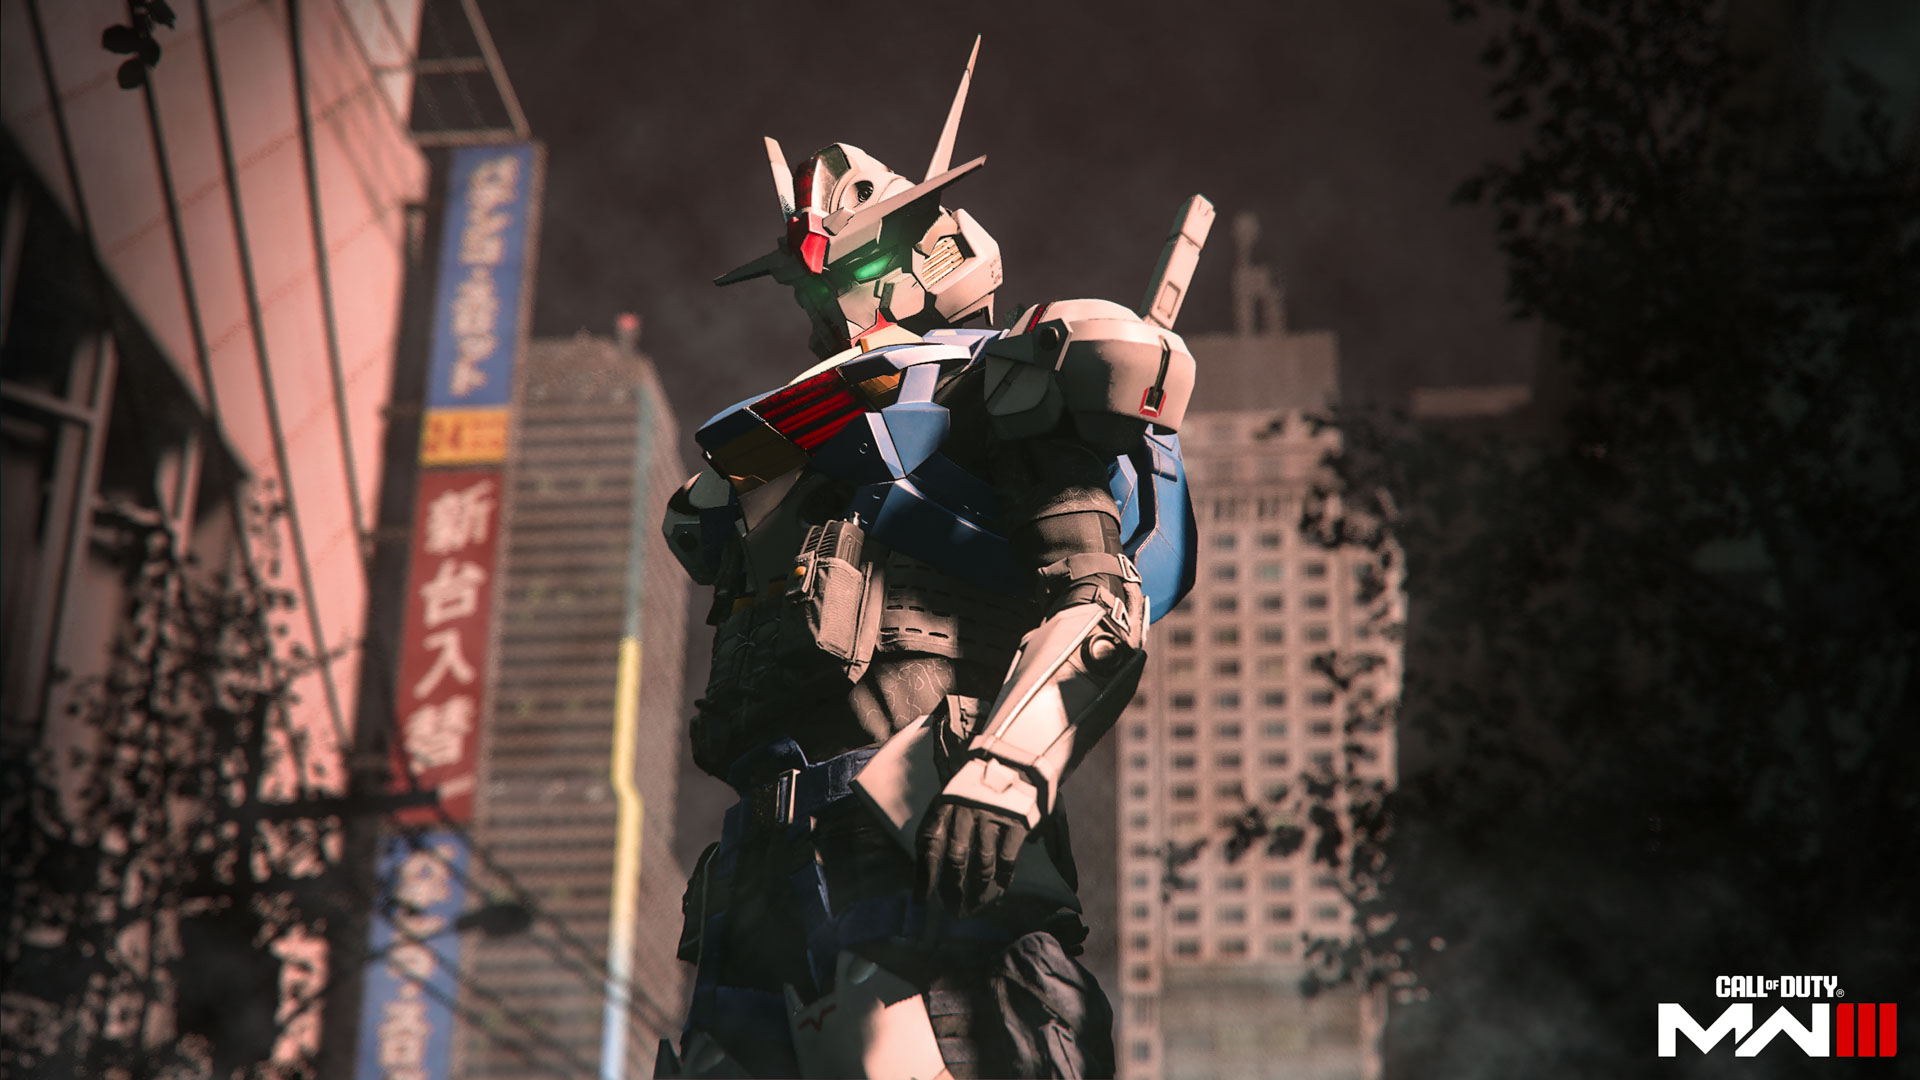 A Gundam stands in a city that bears a resemblance to Tokyo in key art for MW3 season 4.